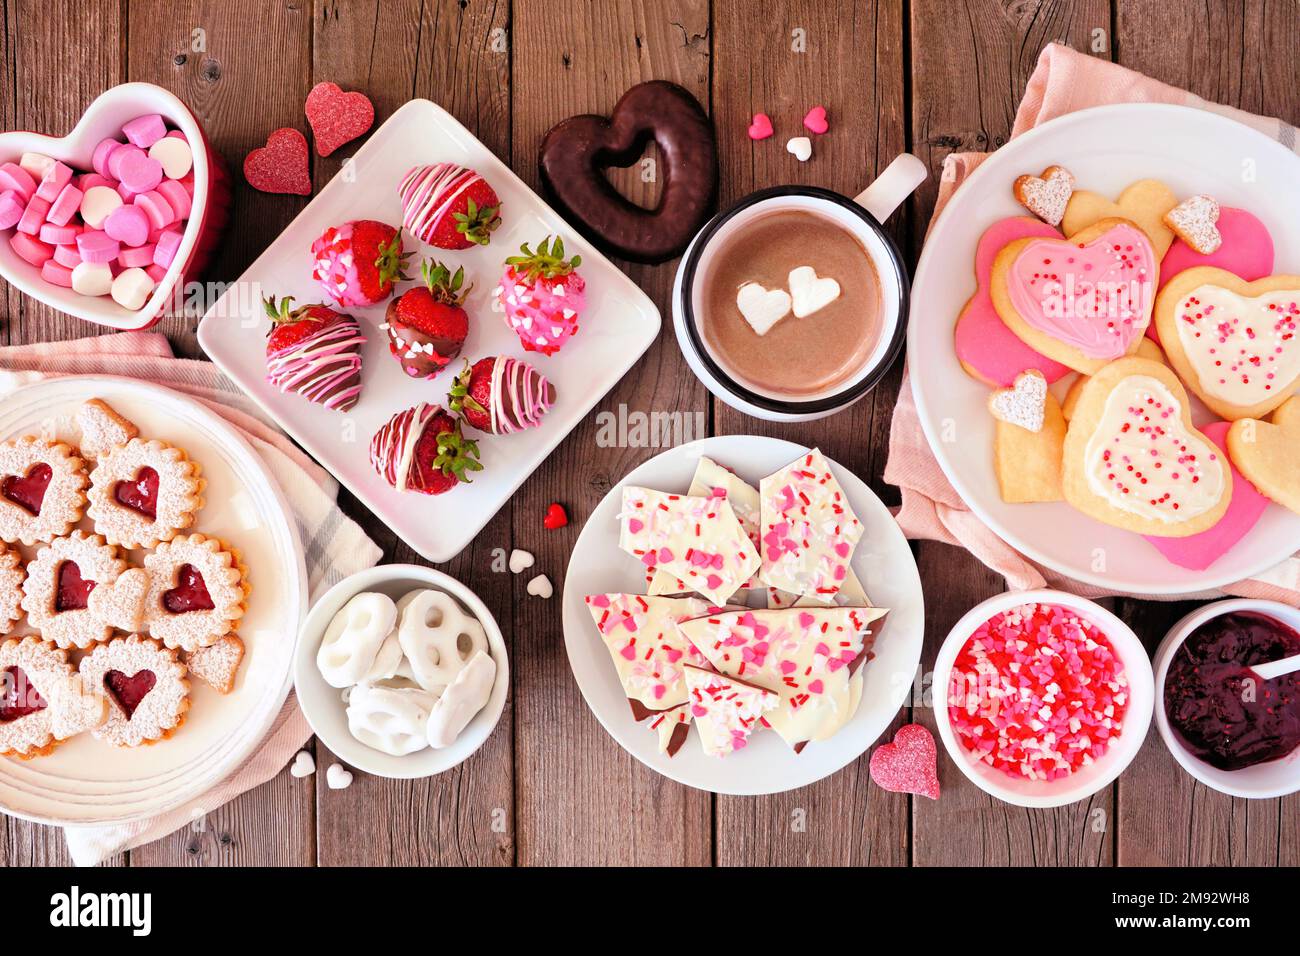 Valentines Day table scene of assorted sweets and cookies. Top view over a rustic wood background. Love and hearts theme. Stock Photo